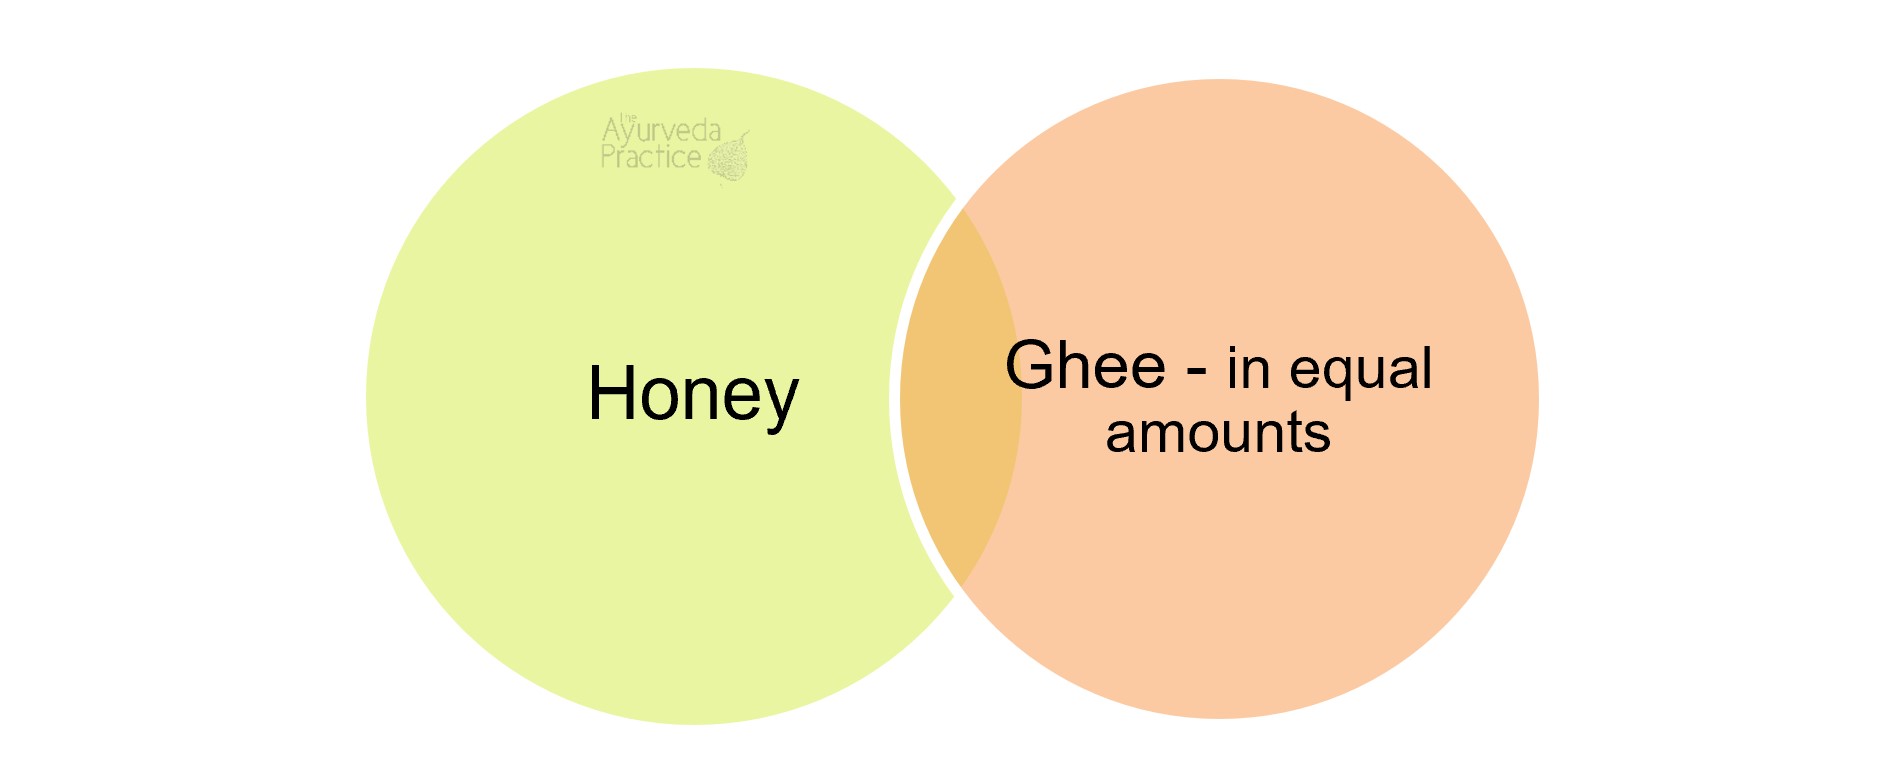 Don't combine honey and ghee in equal amounts.